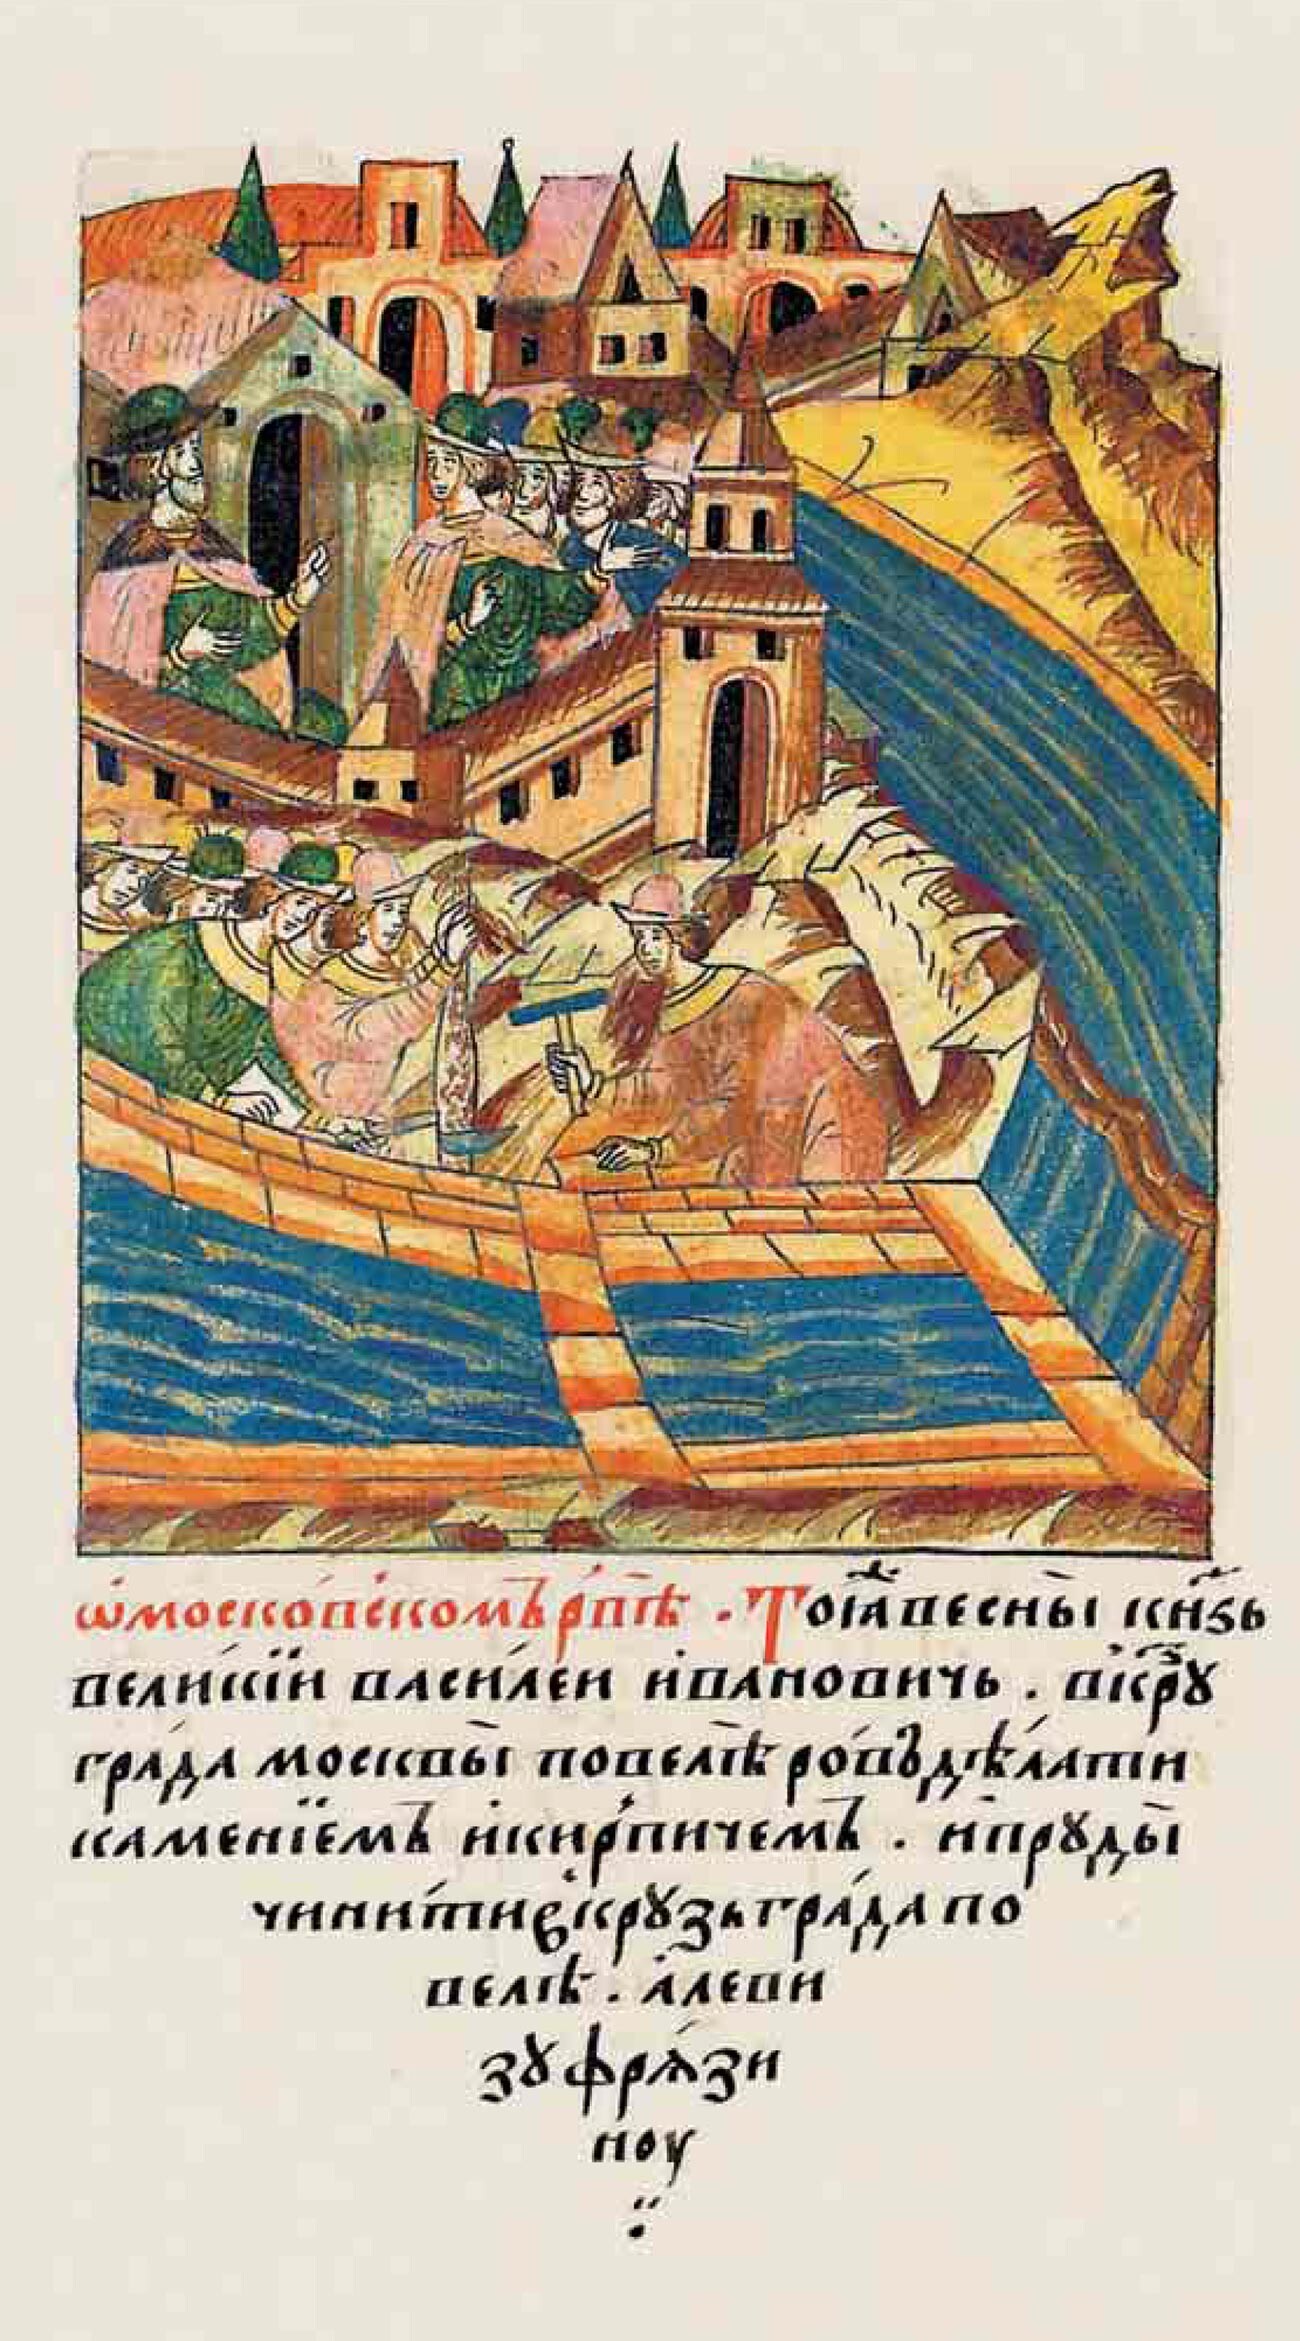 Vasily III gives an order to Alevis to create a moat